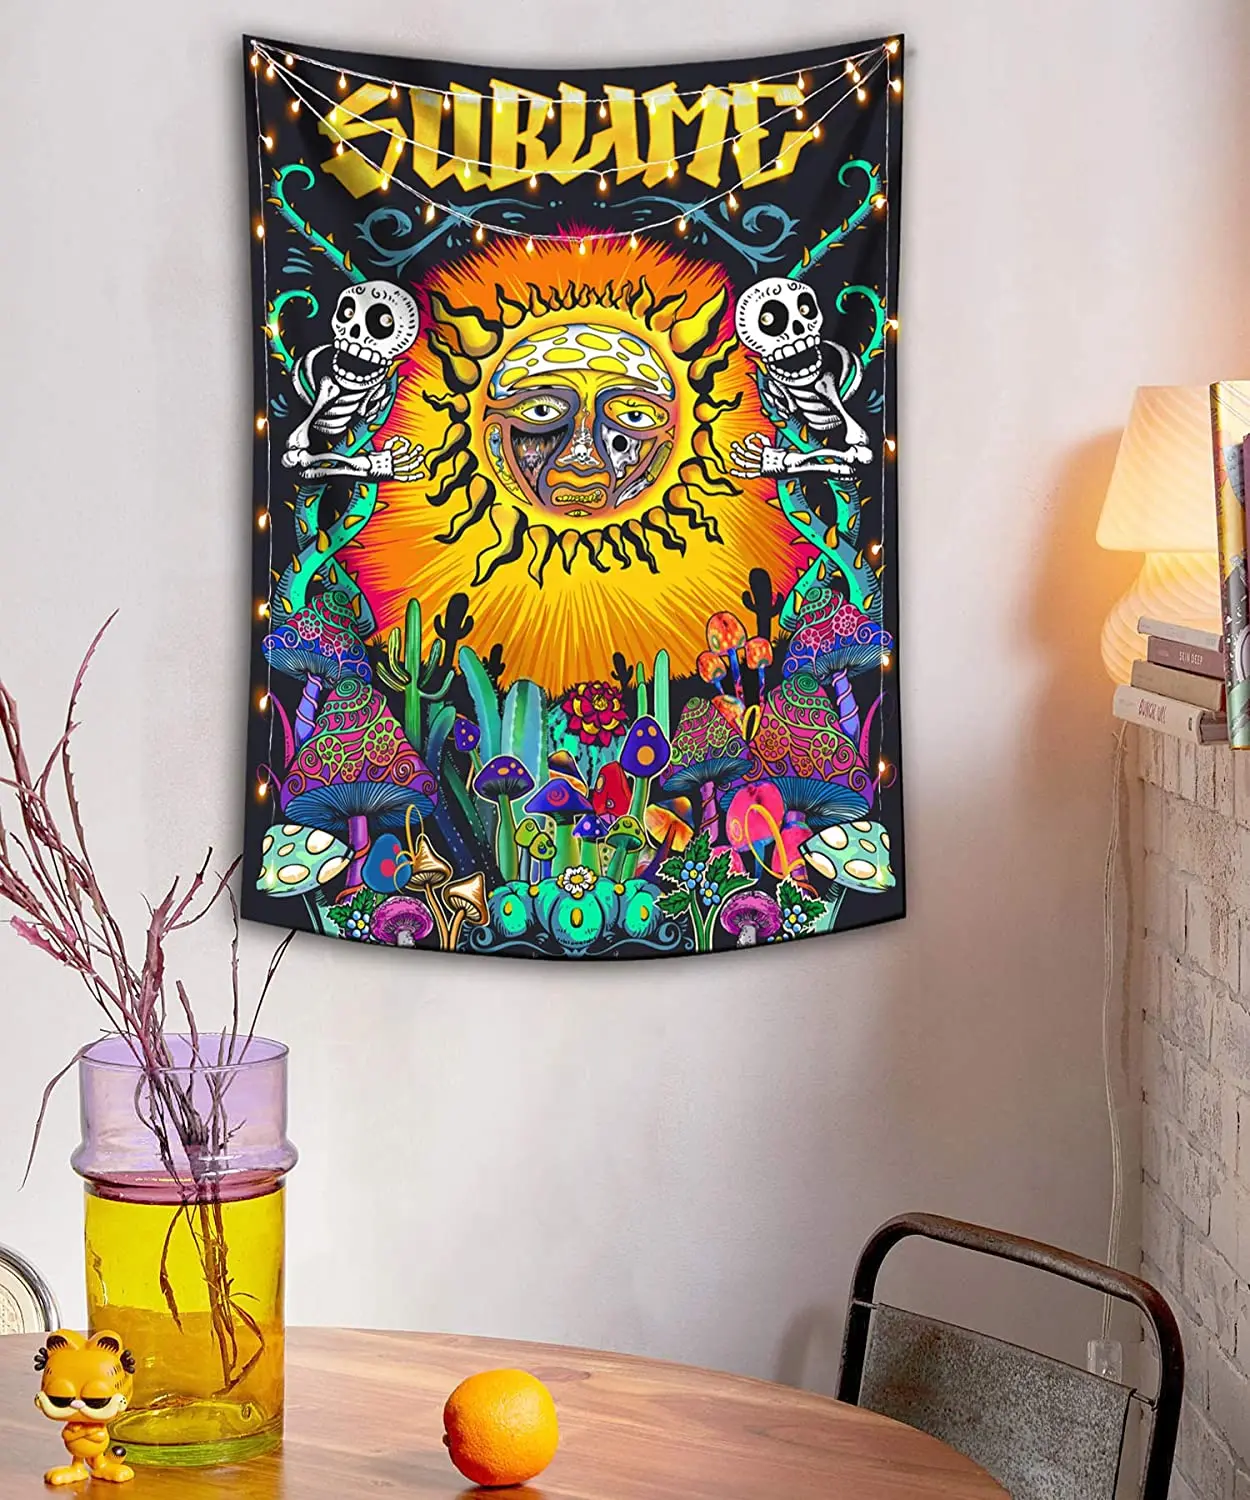 

Psychedelic Hippie Tapestry Trippy Sublime Sun Tapiz Pared Wall Hanging Vertical Colorful Mushroom Cactus Art Decor for Home